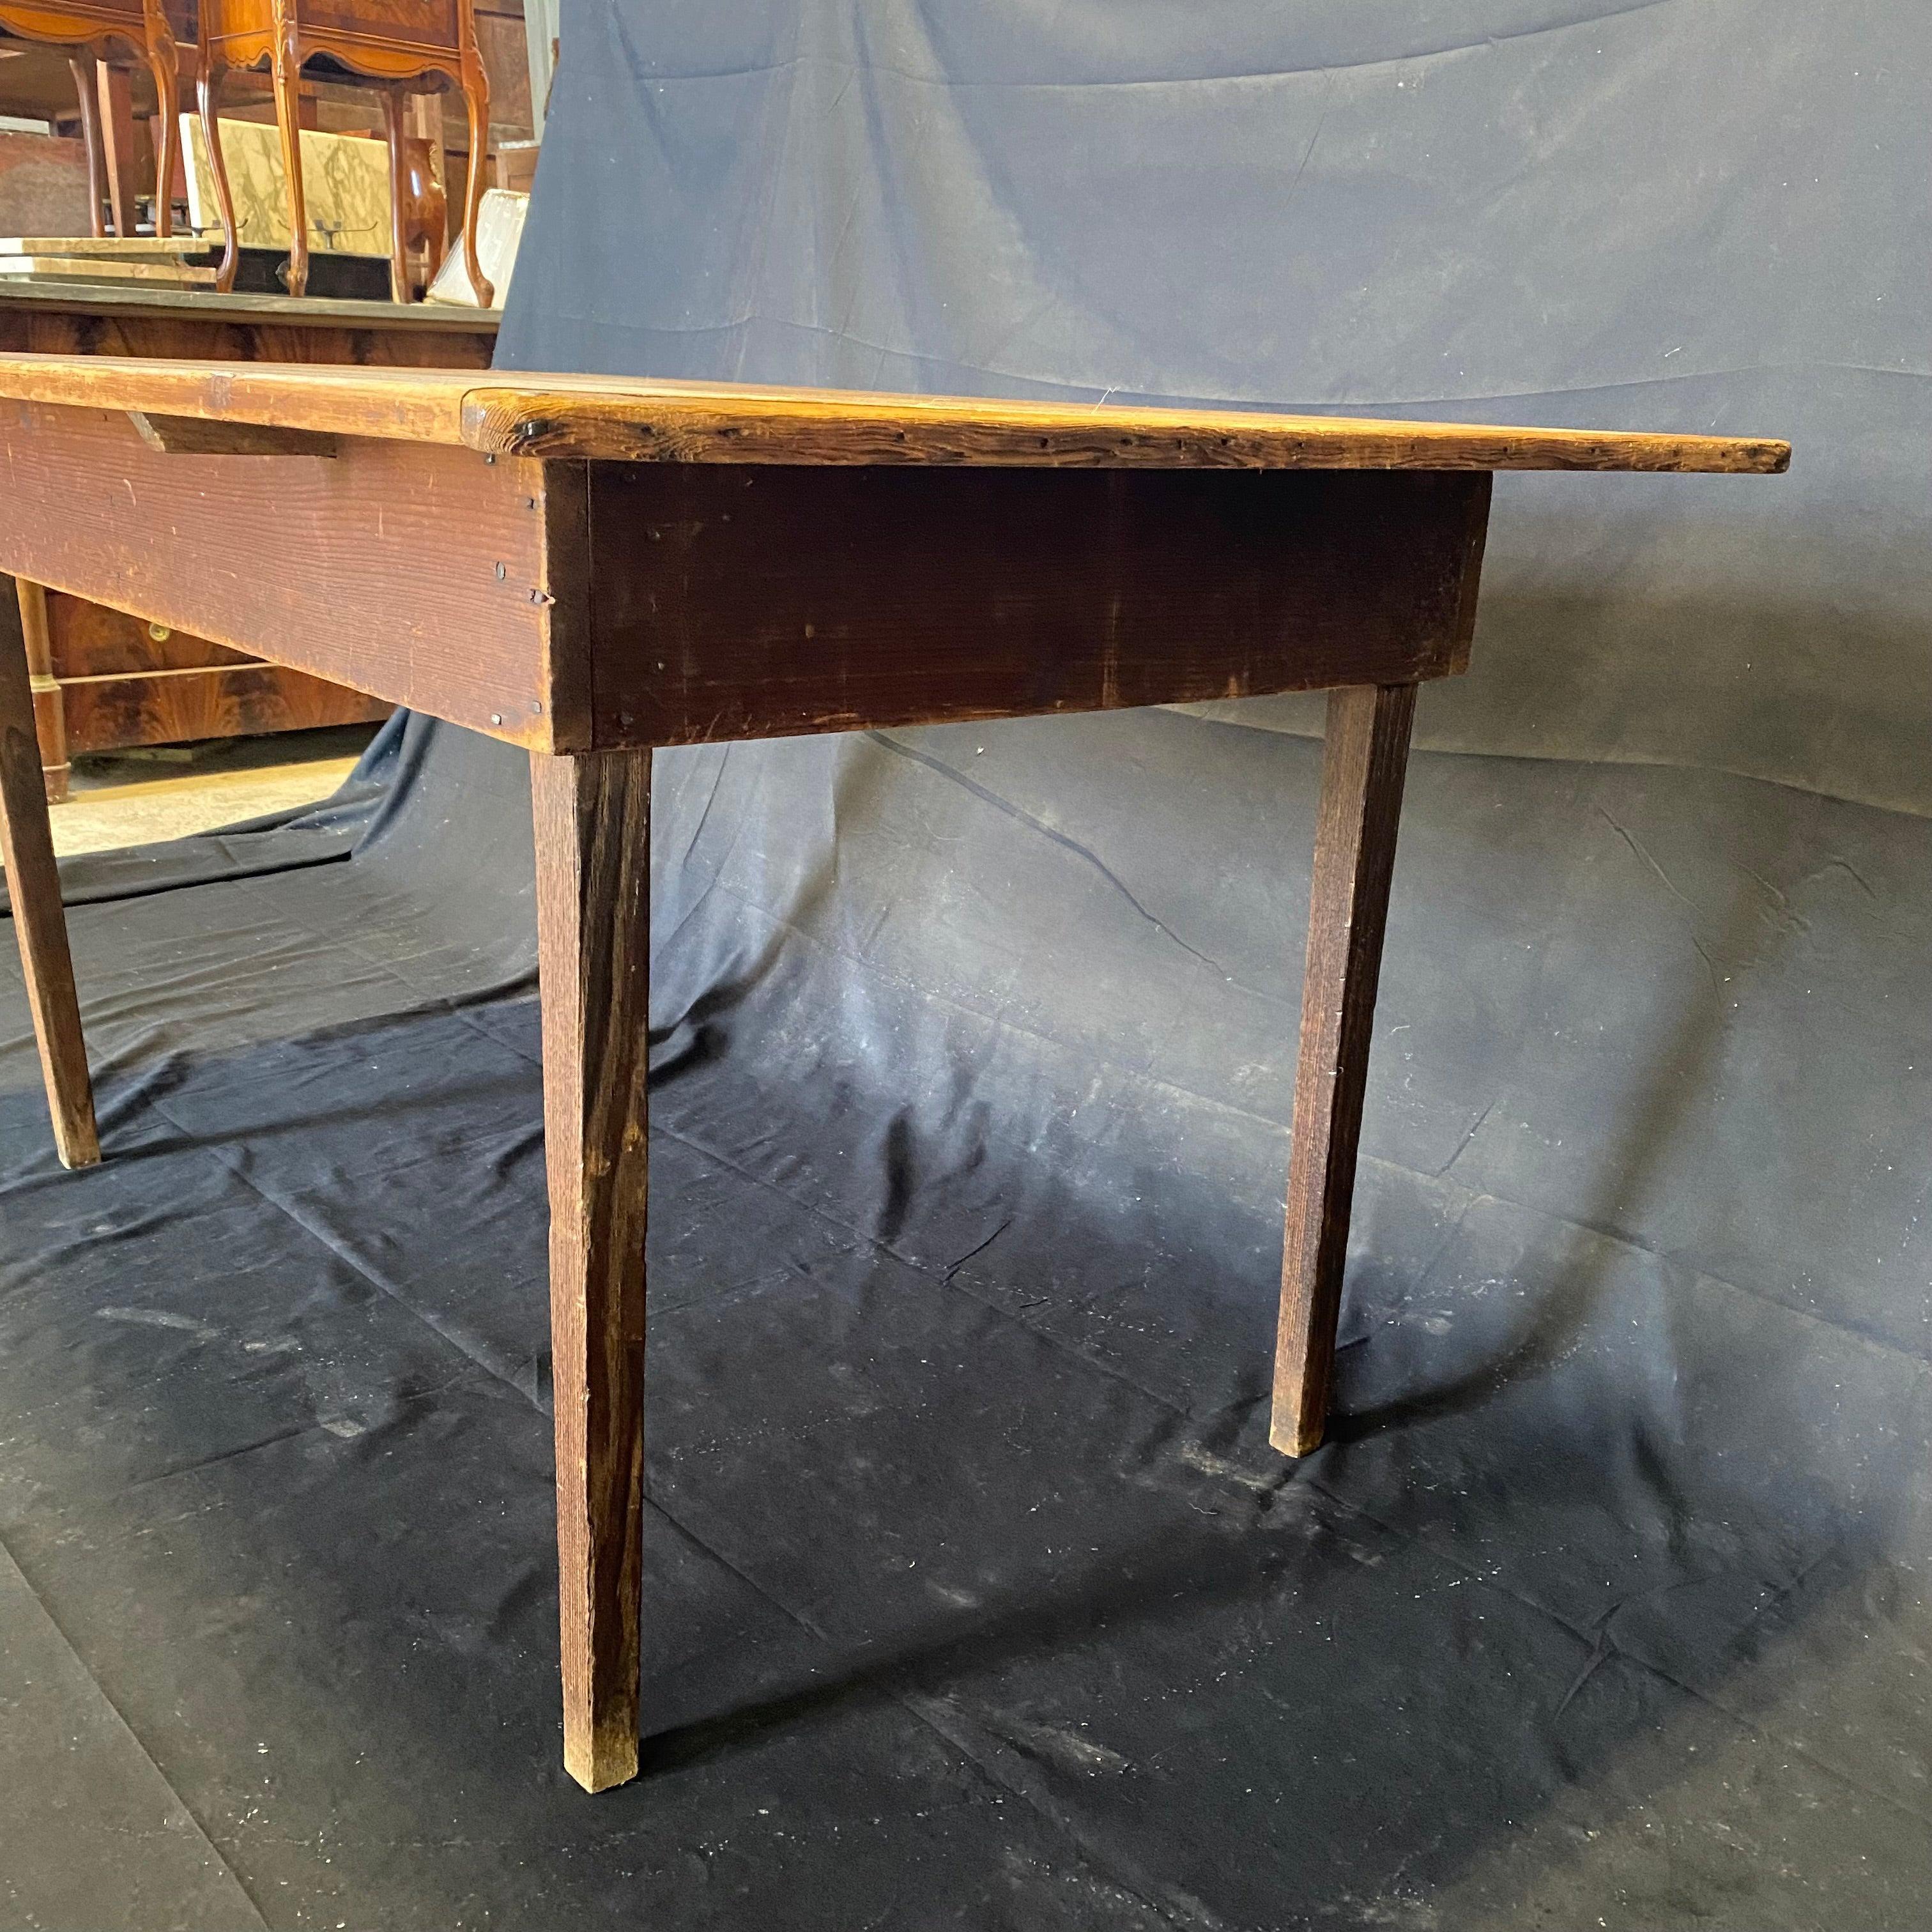 Classic Maine Antique Pine Dining Table or Desk with Original Red Chalk Paint 1